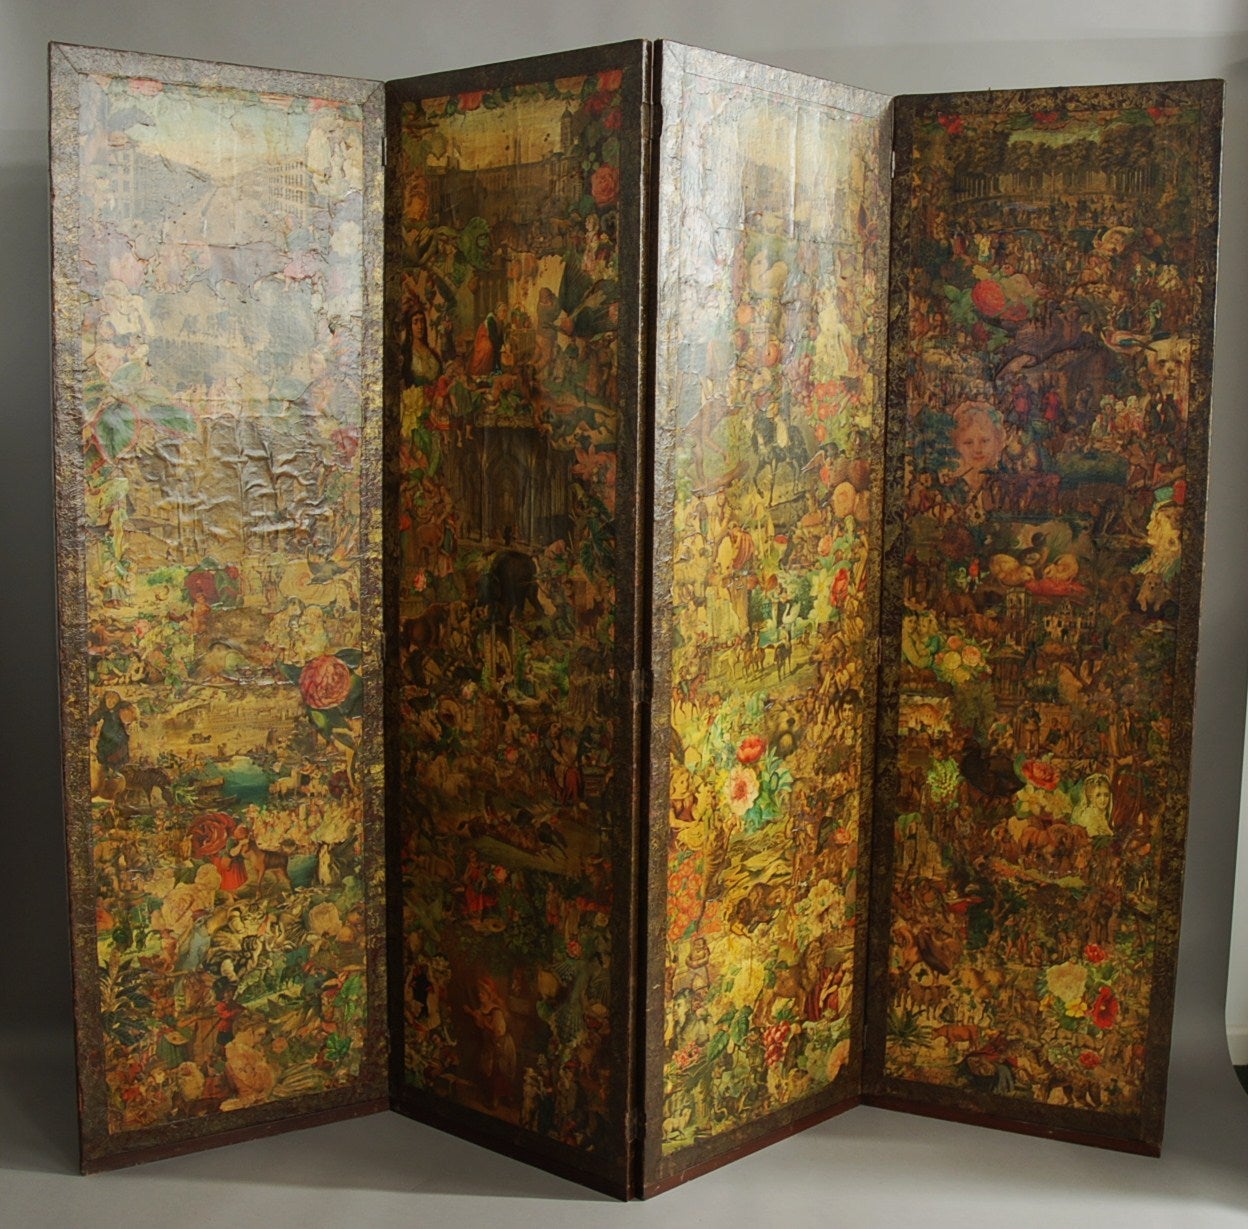 A late 19th century four-panel folding decoupage screen.

This screen consists of four stained wooden panels, each decorated both front and back with decoupage embellishment which was popular at this period. 

The word decoupage is a French word